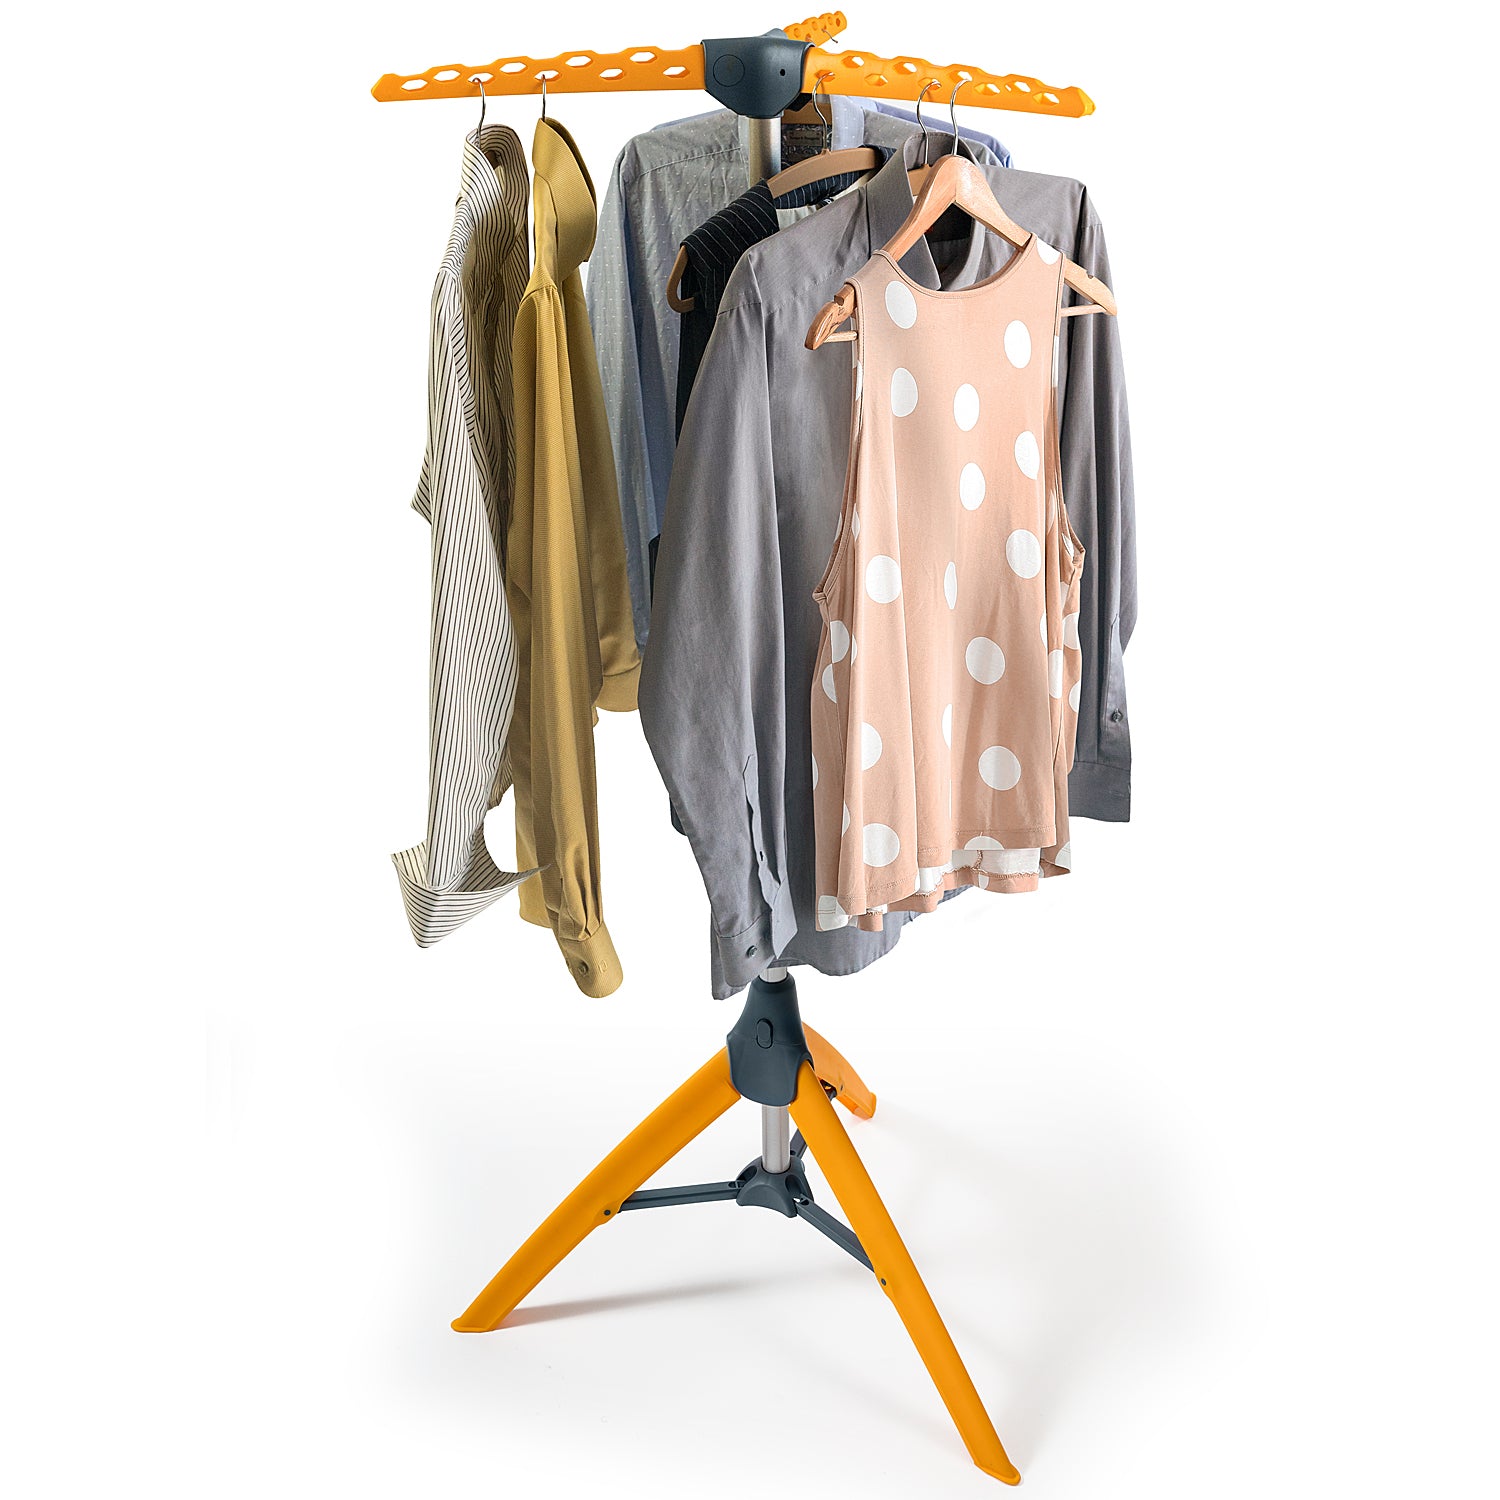 Sturdy Foldable Clothes Airer, Clothes Hangers Stand, Foldable Clothes Rack, Tripod Air Dryer, Tatkraft Palm, 9